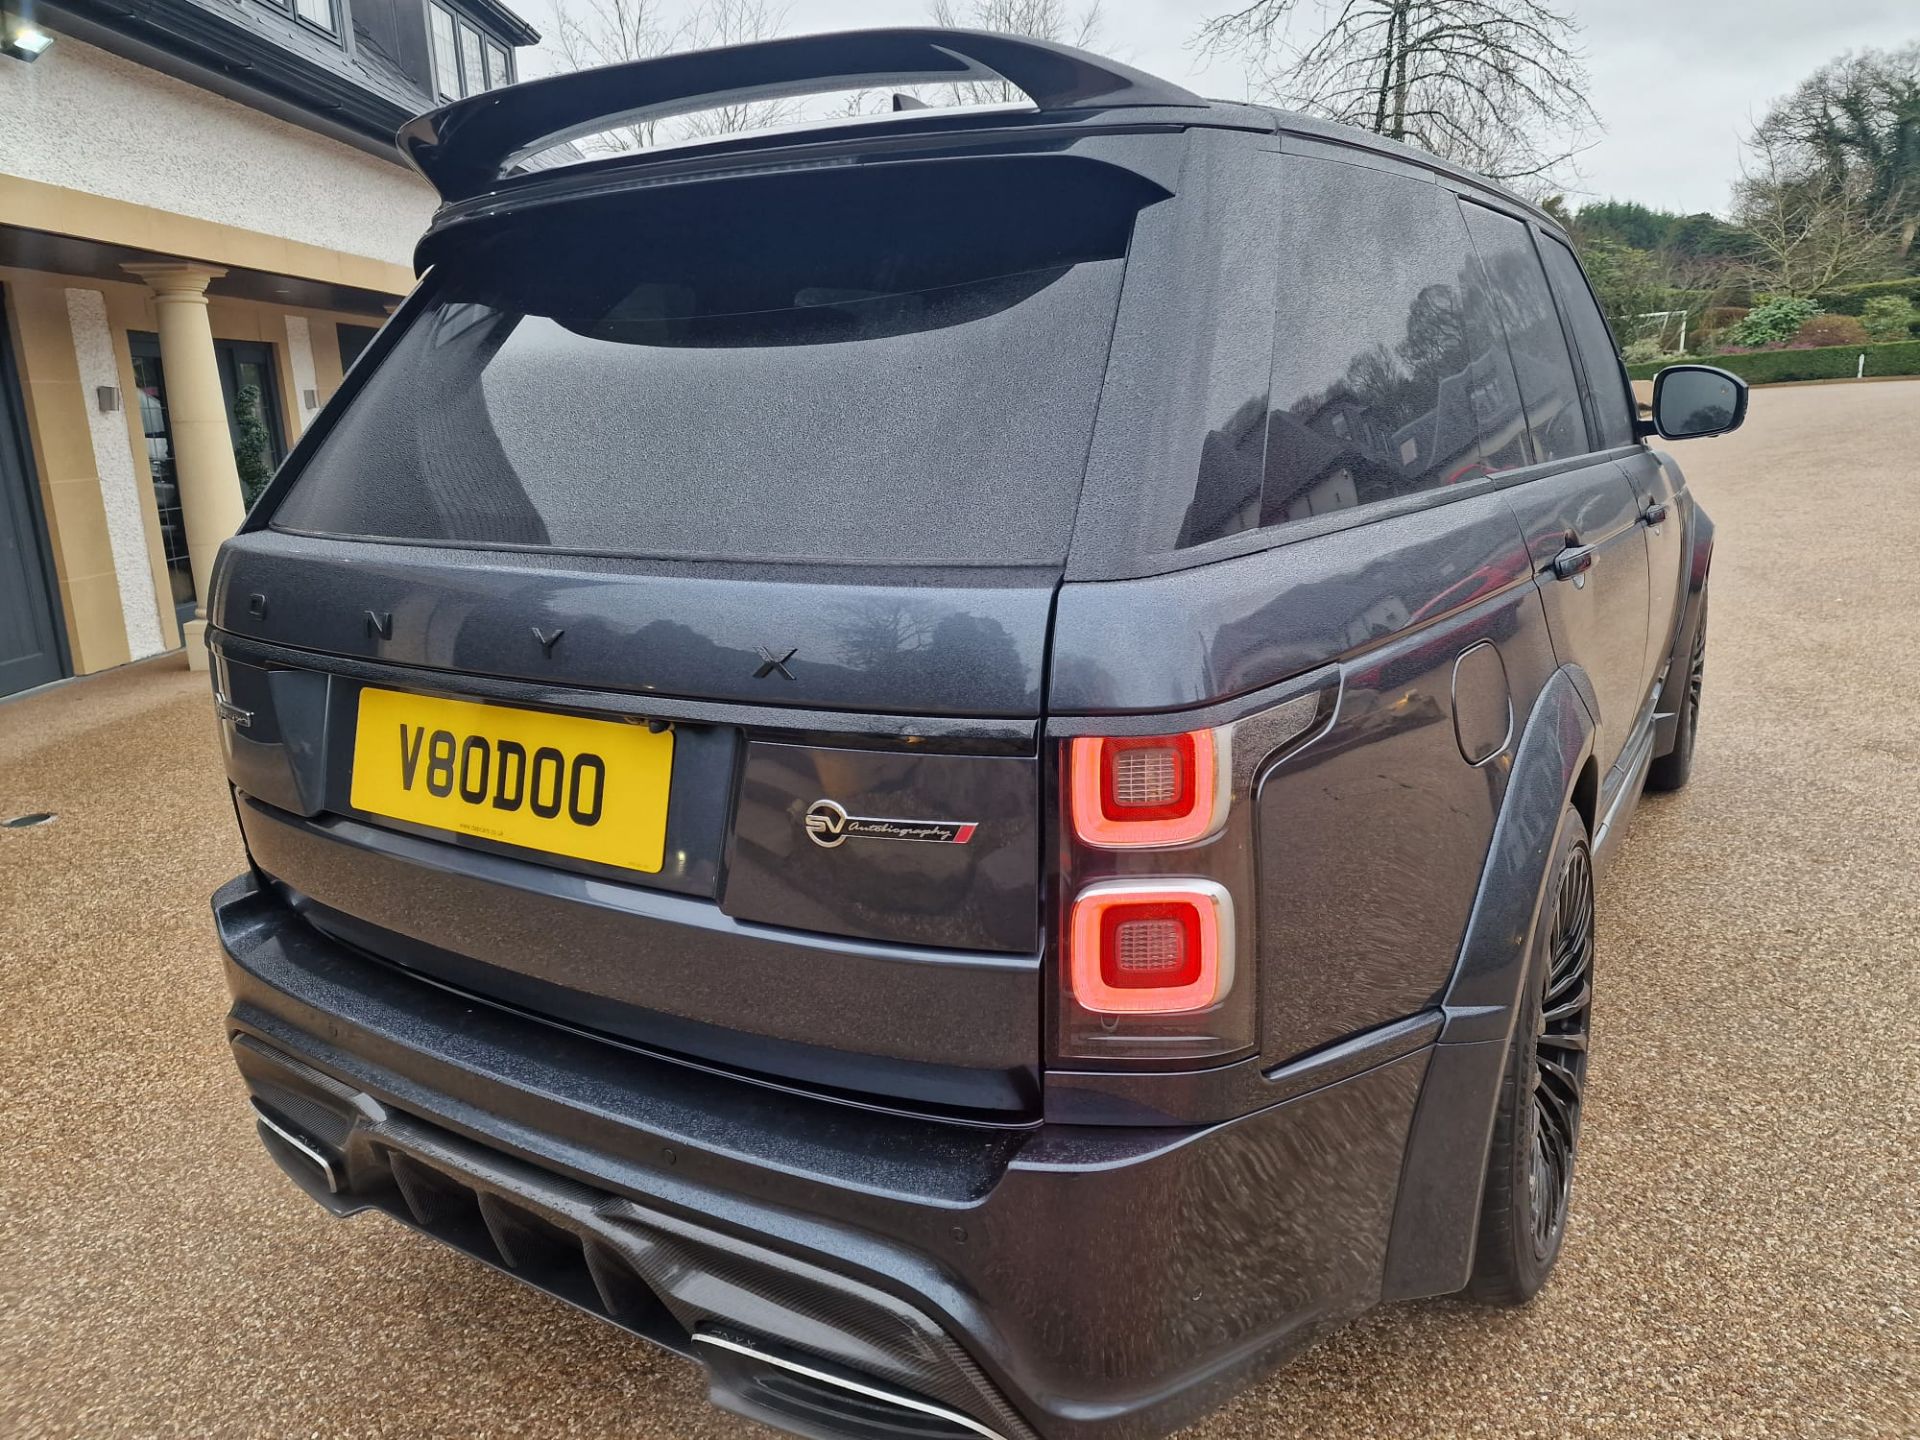 2018/68 RANGE ROVER SV AUTOBIOGRAPHY DYN V8 SC AUTO - £40K WORTH OF ONYX BODY KIT AND CONVERSION - Image 13 of 77